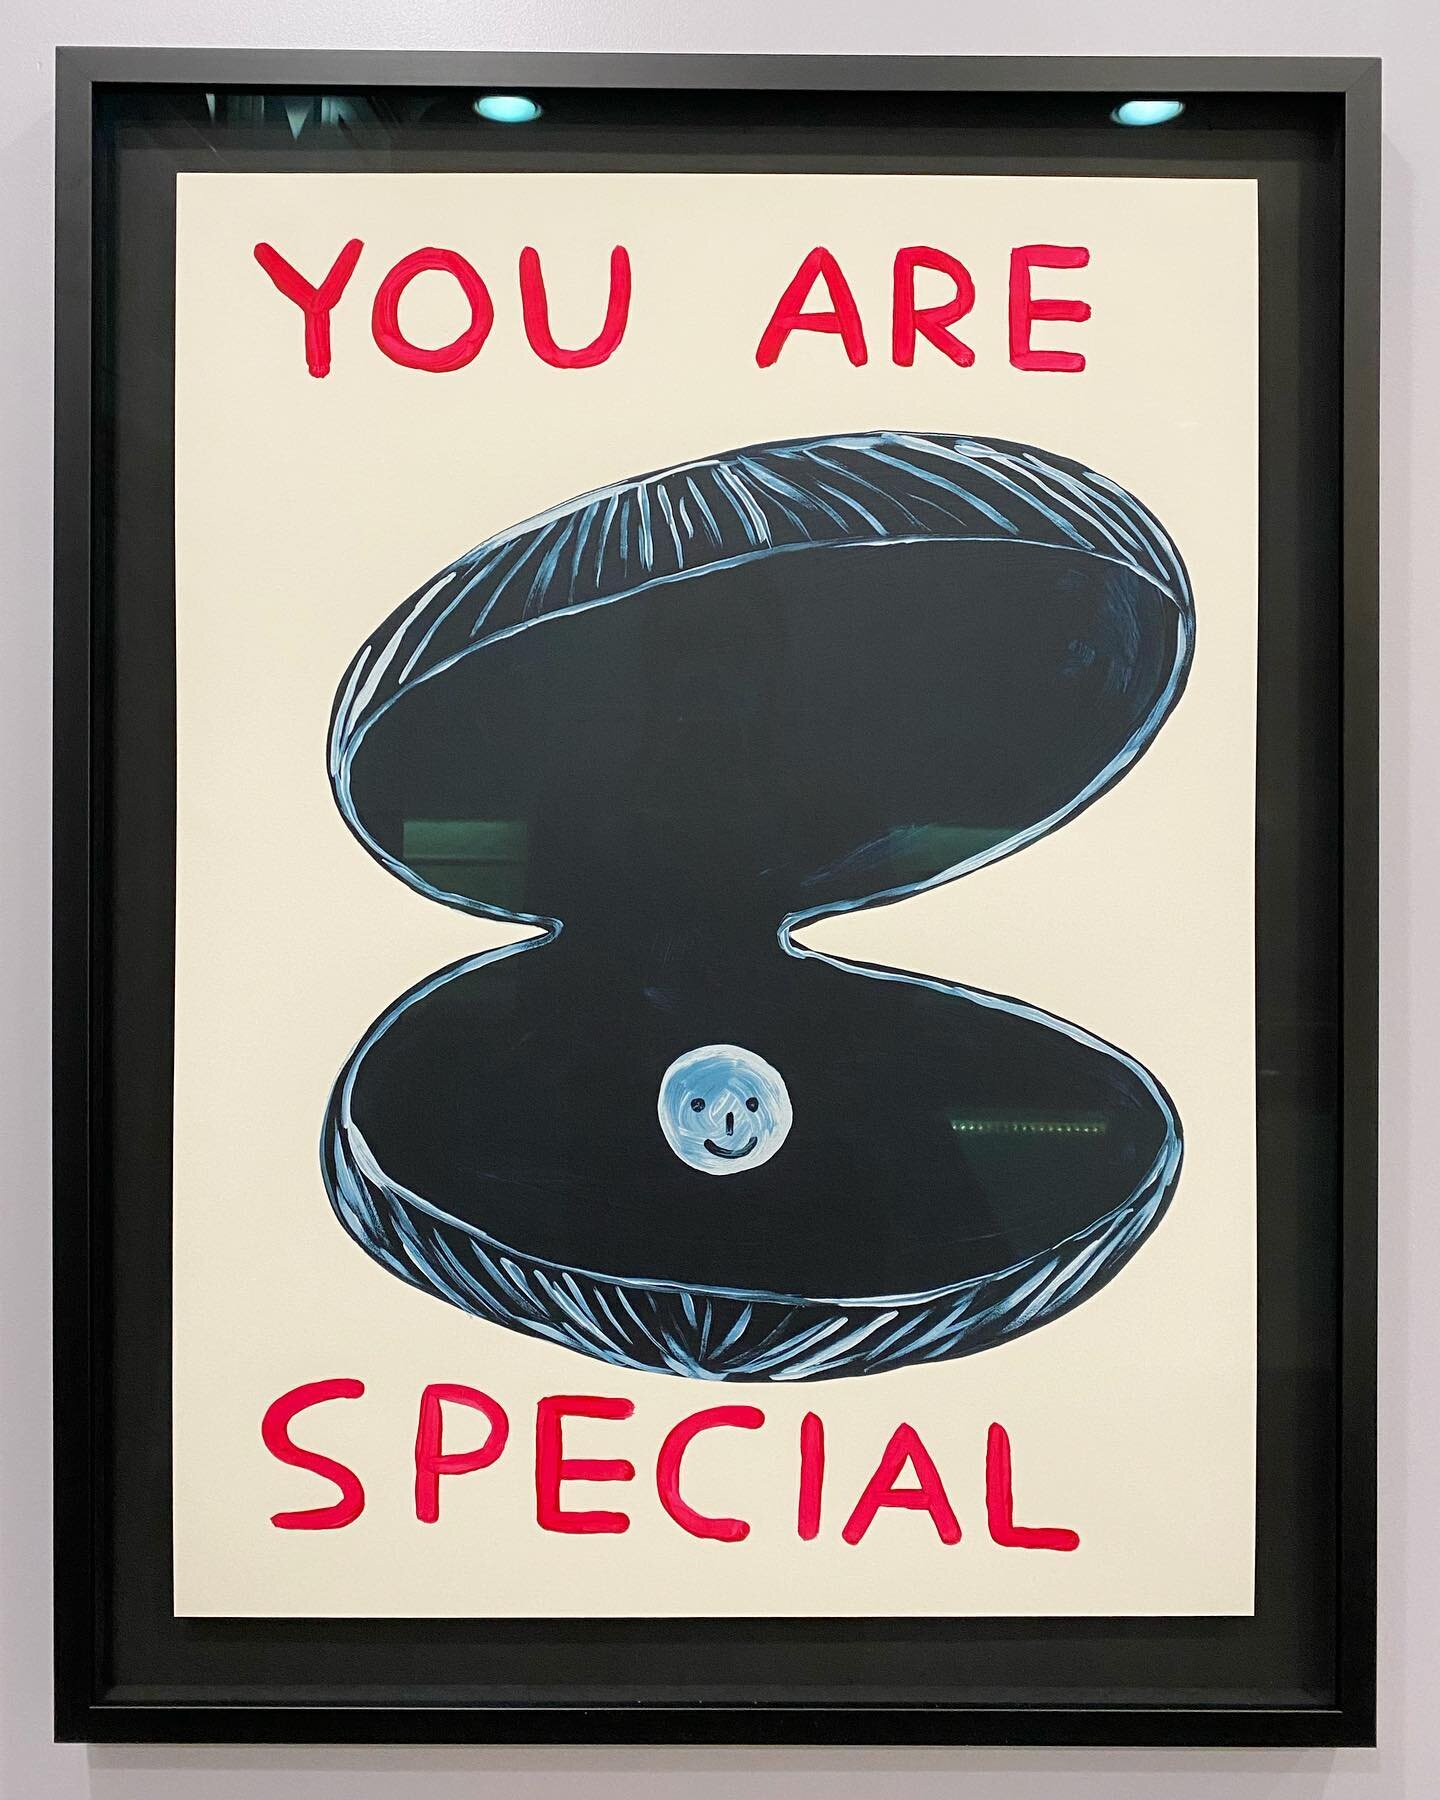 After this week, it feels like it&rsquo;s going to be a self-care weekend. 

&lsquo;You Are Special&rsquo; @davidshrigley